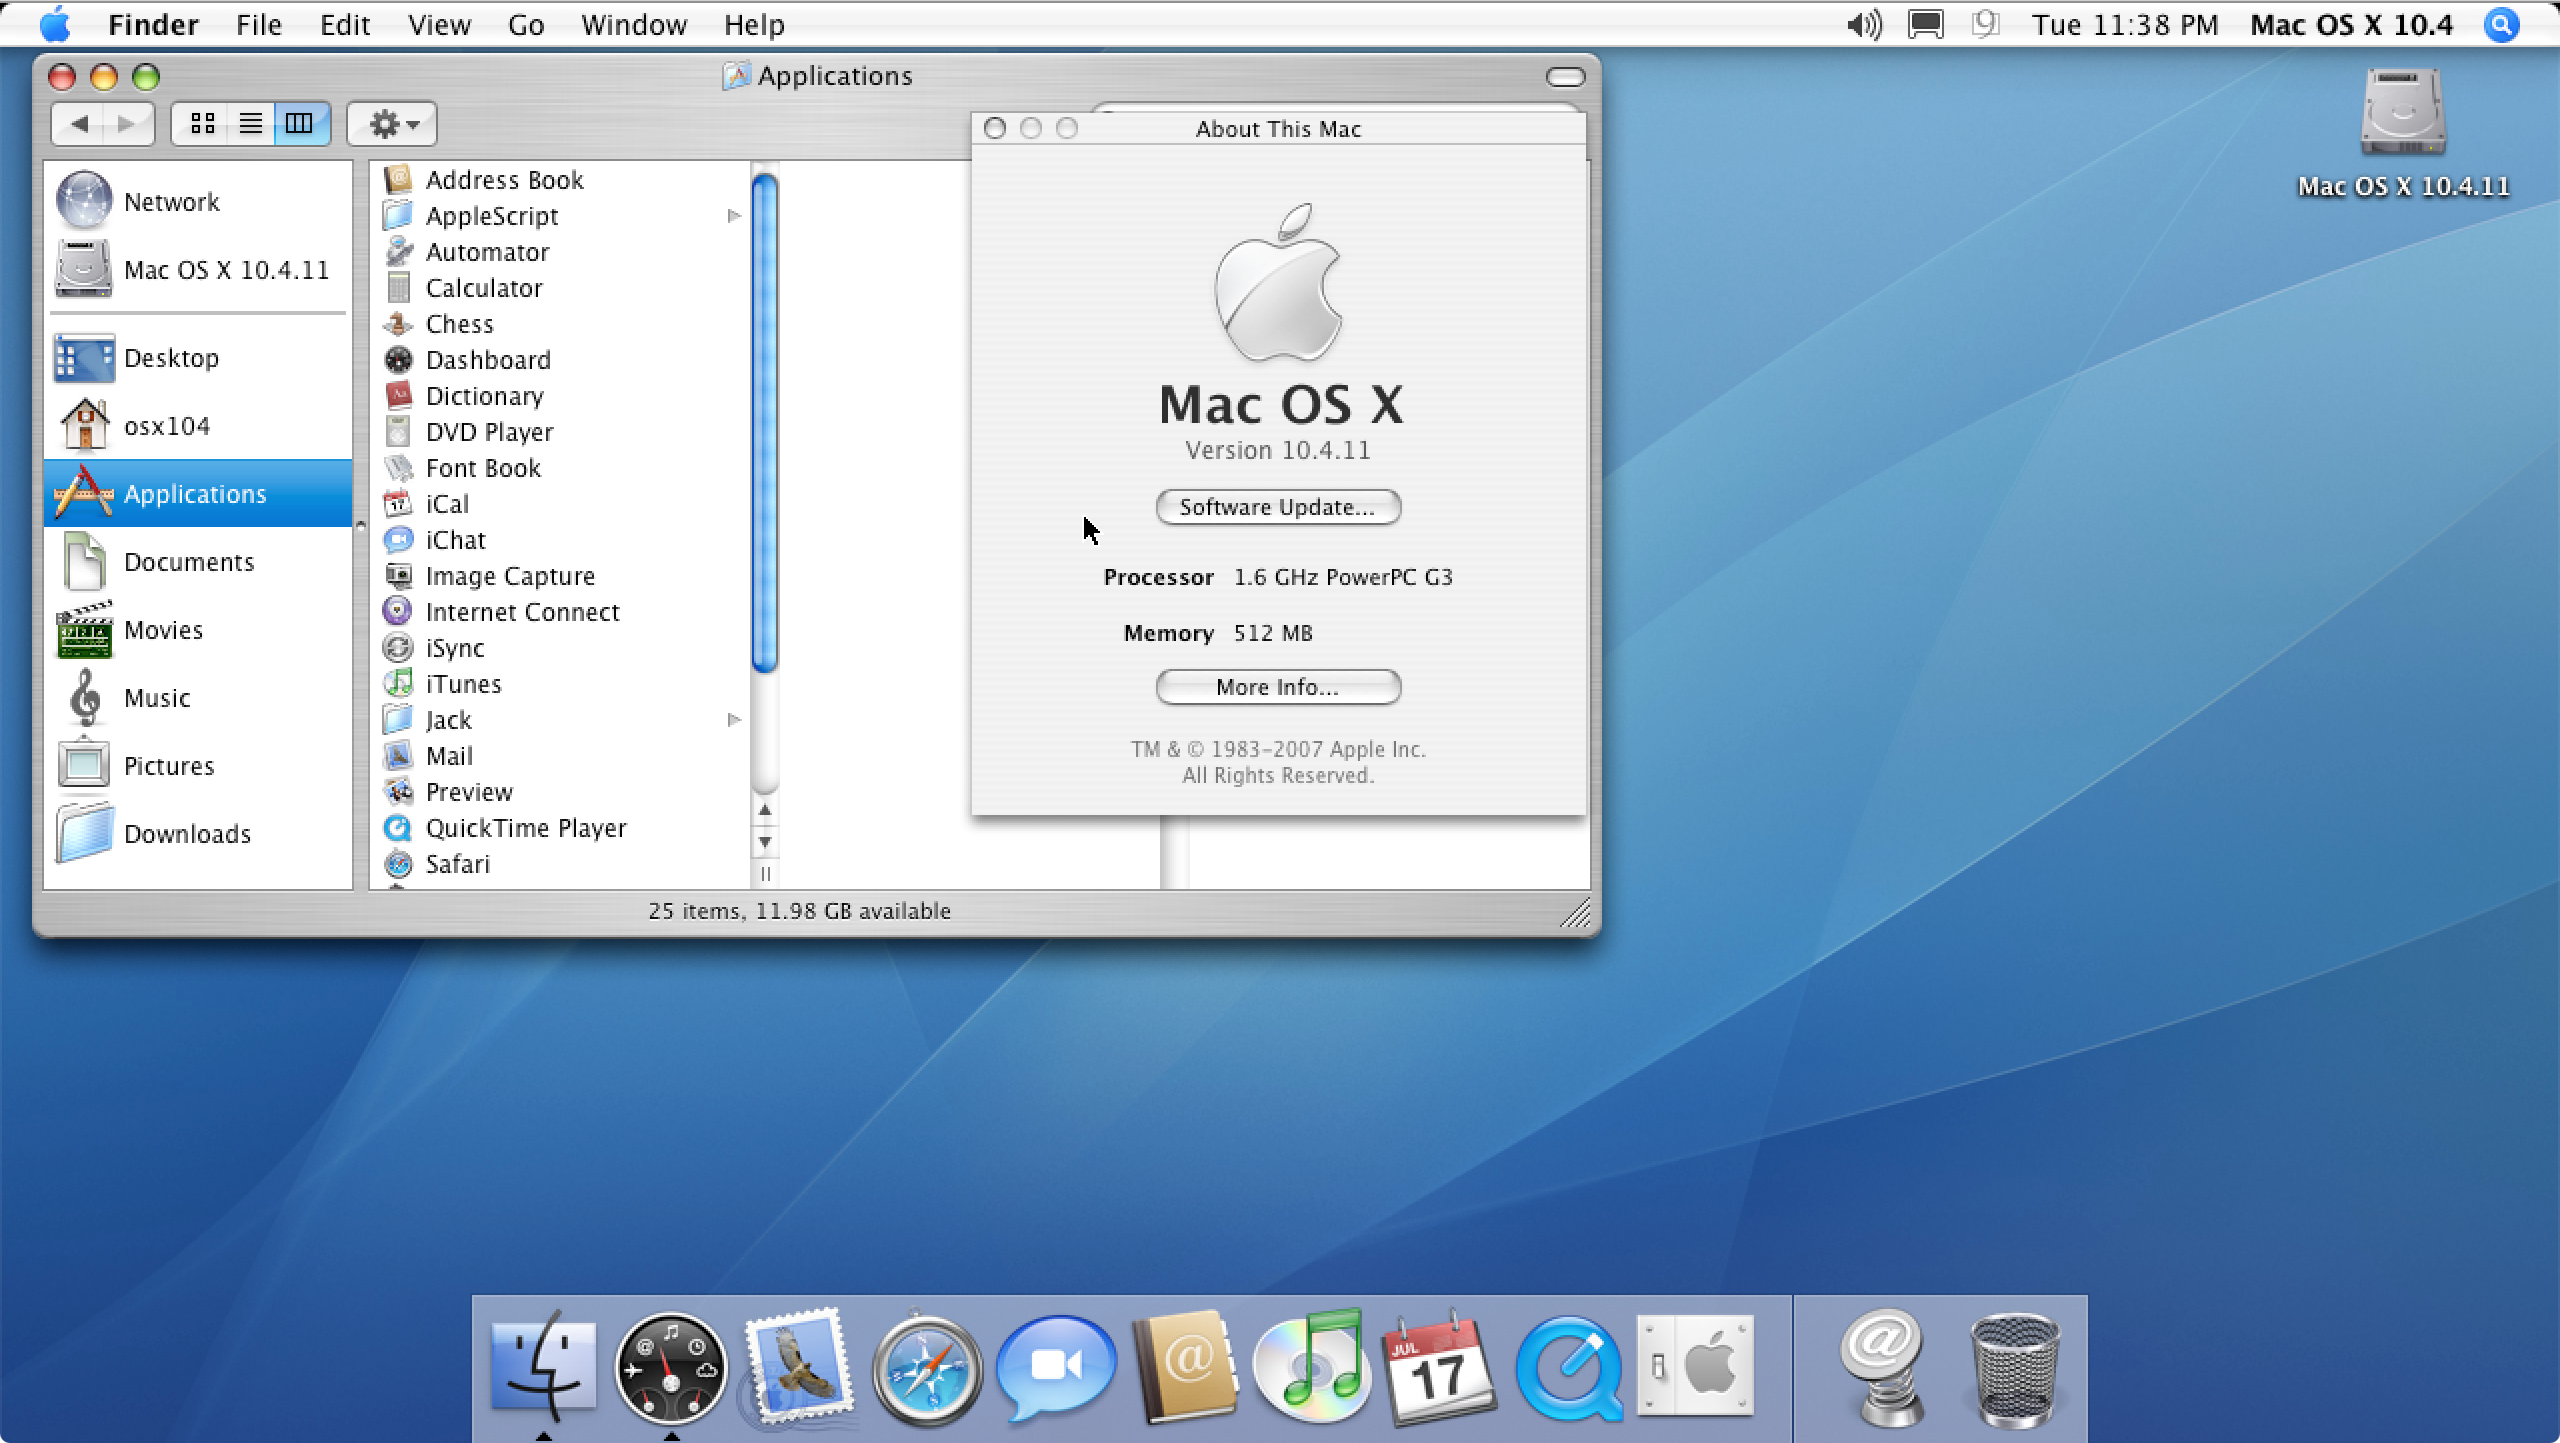 excel for mac os x 10.4.11